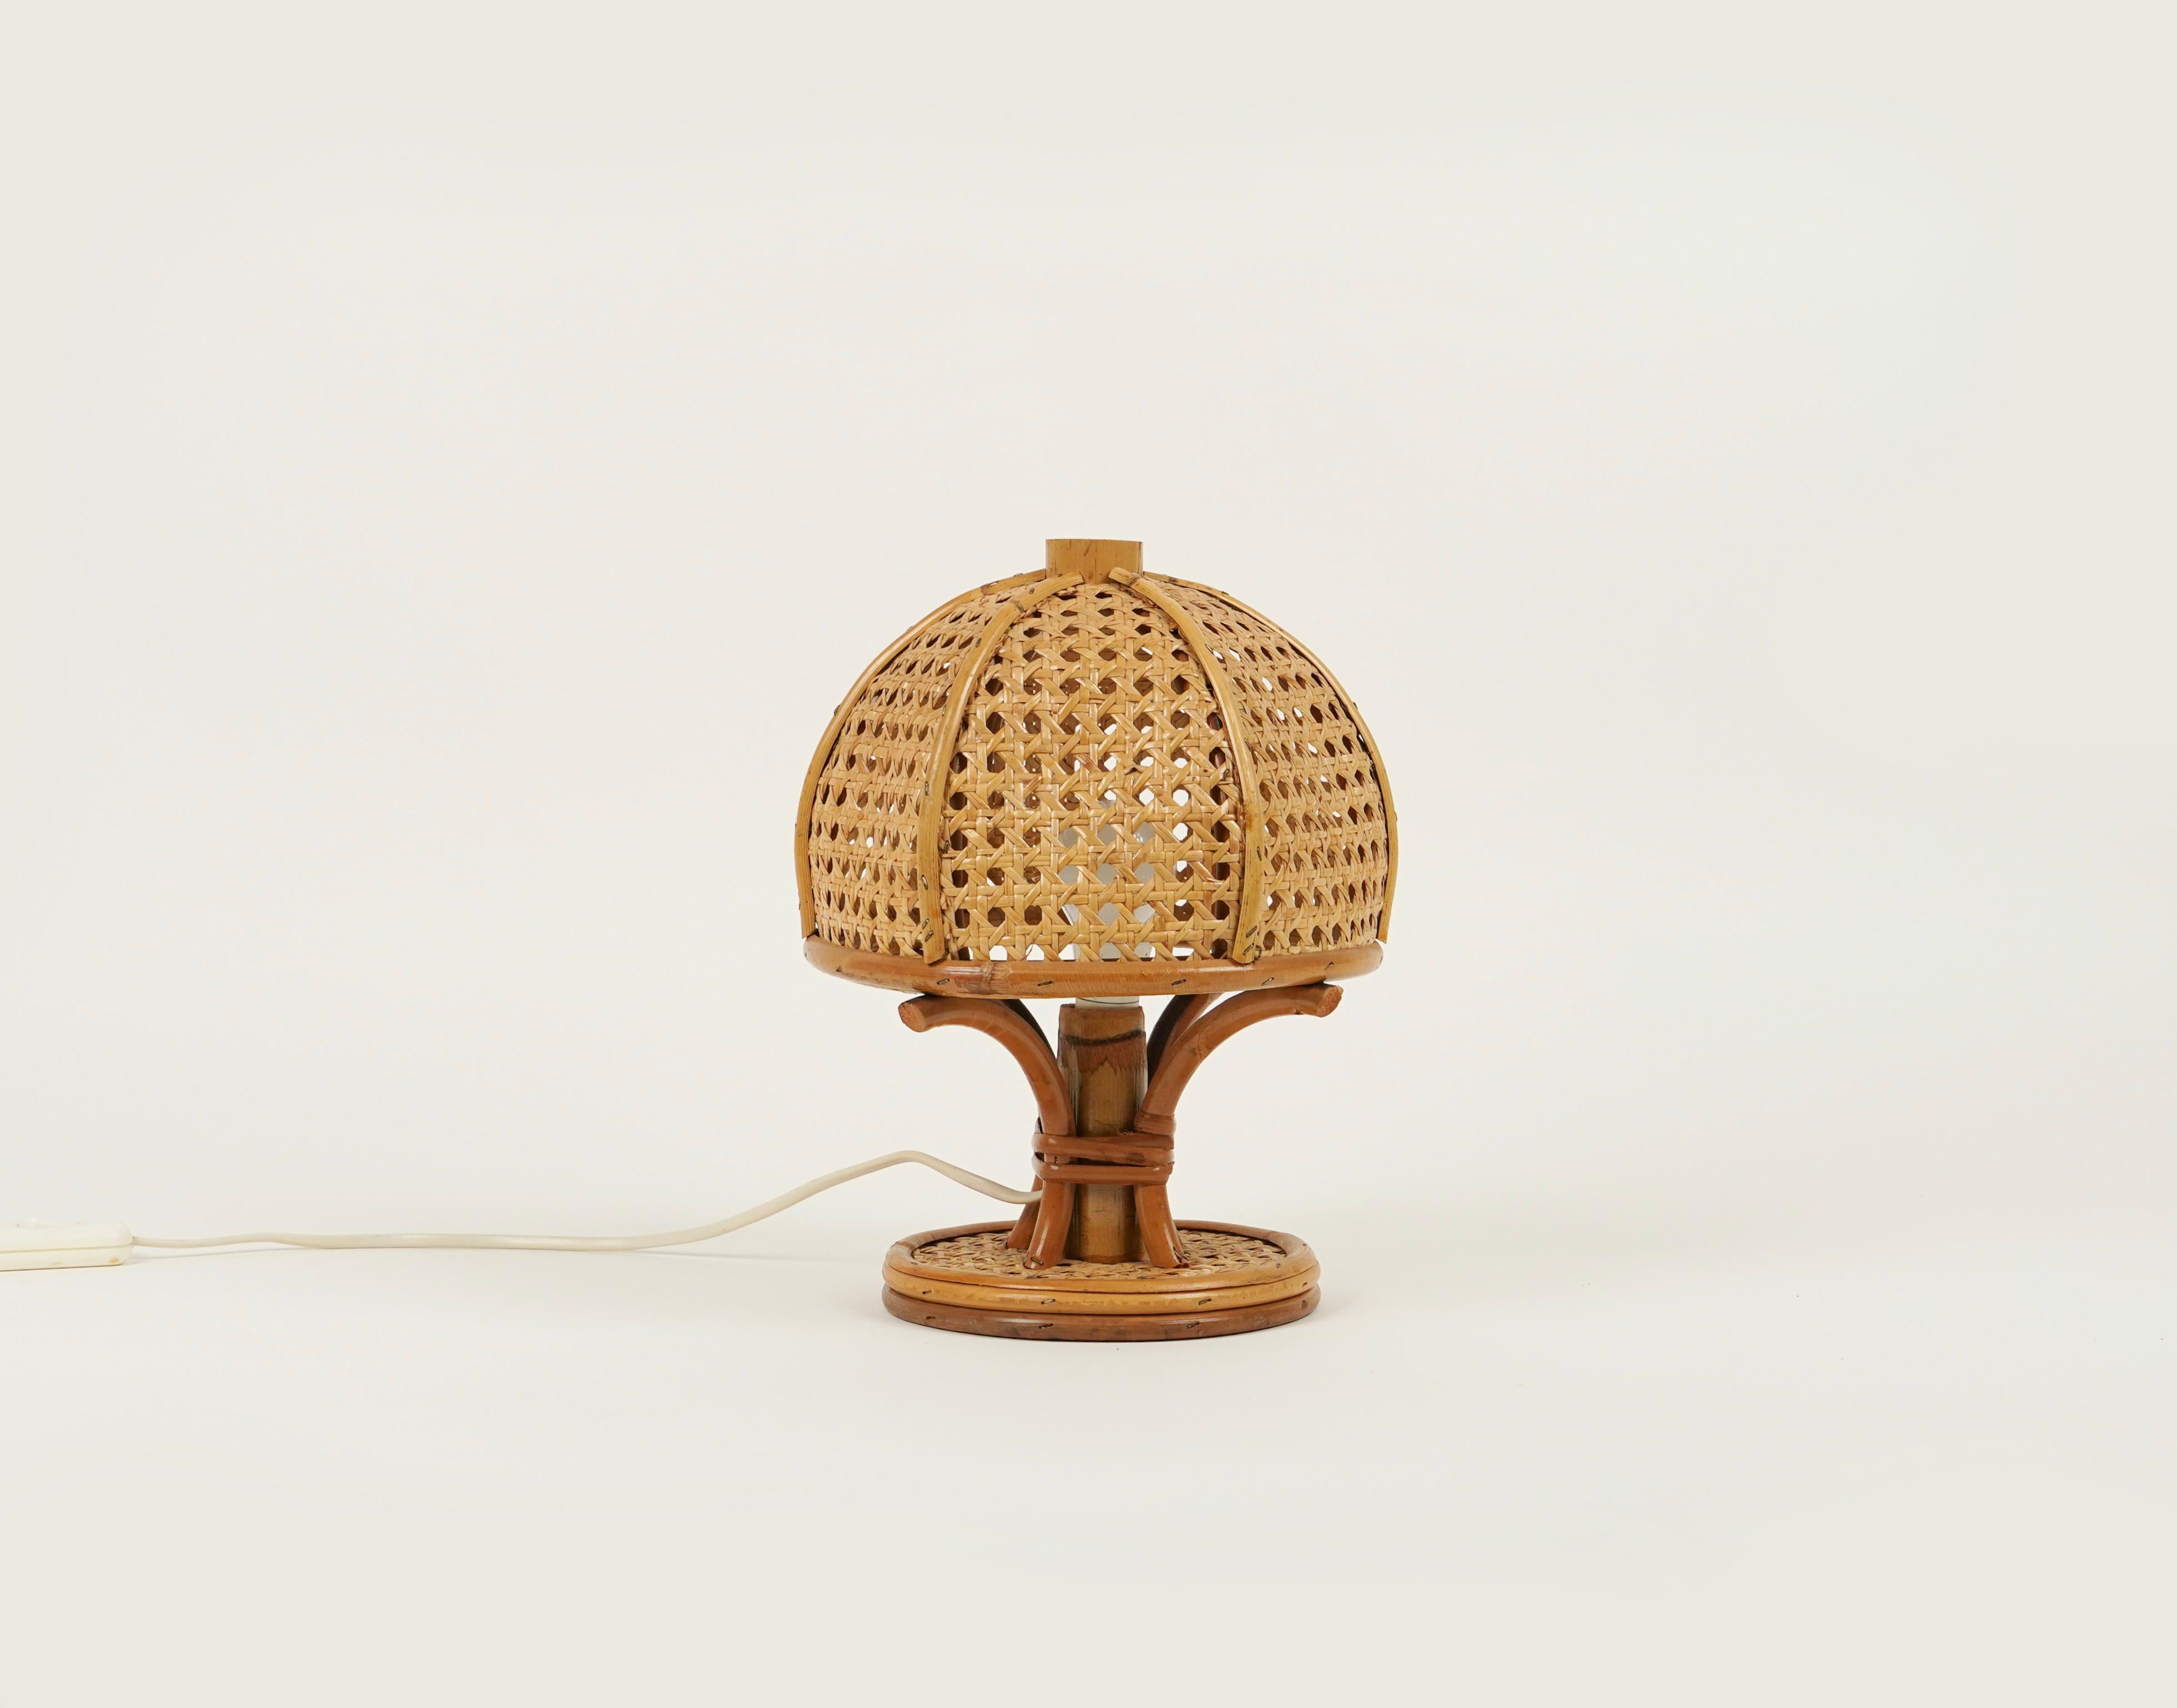 Beautiful table lamp in bamboo and rattan in the style of Louis Sognot.

Made in Italy in the 1970s.

Louis Sognot was a French designer best known for his elegant furniture made from a combination of rattan and wood. Sognot was influenced by